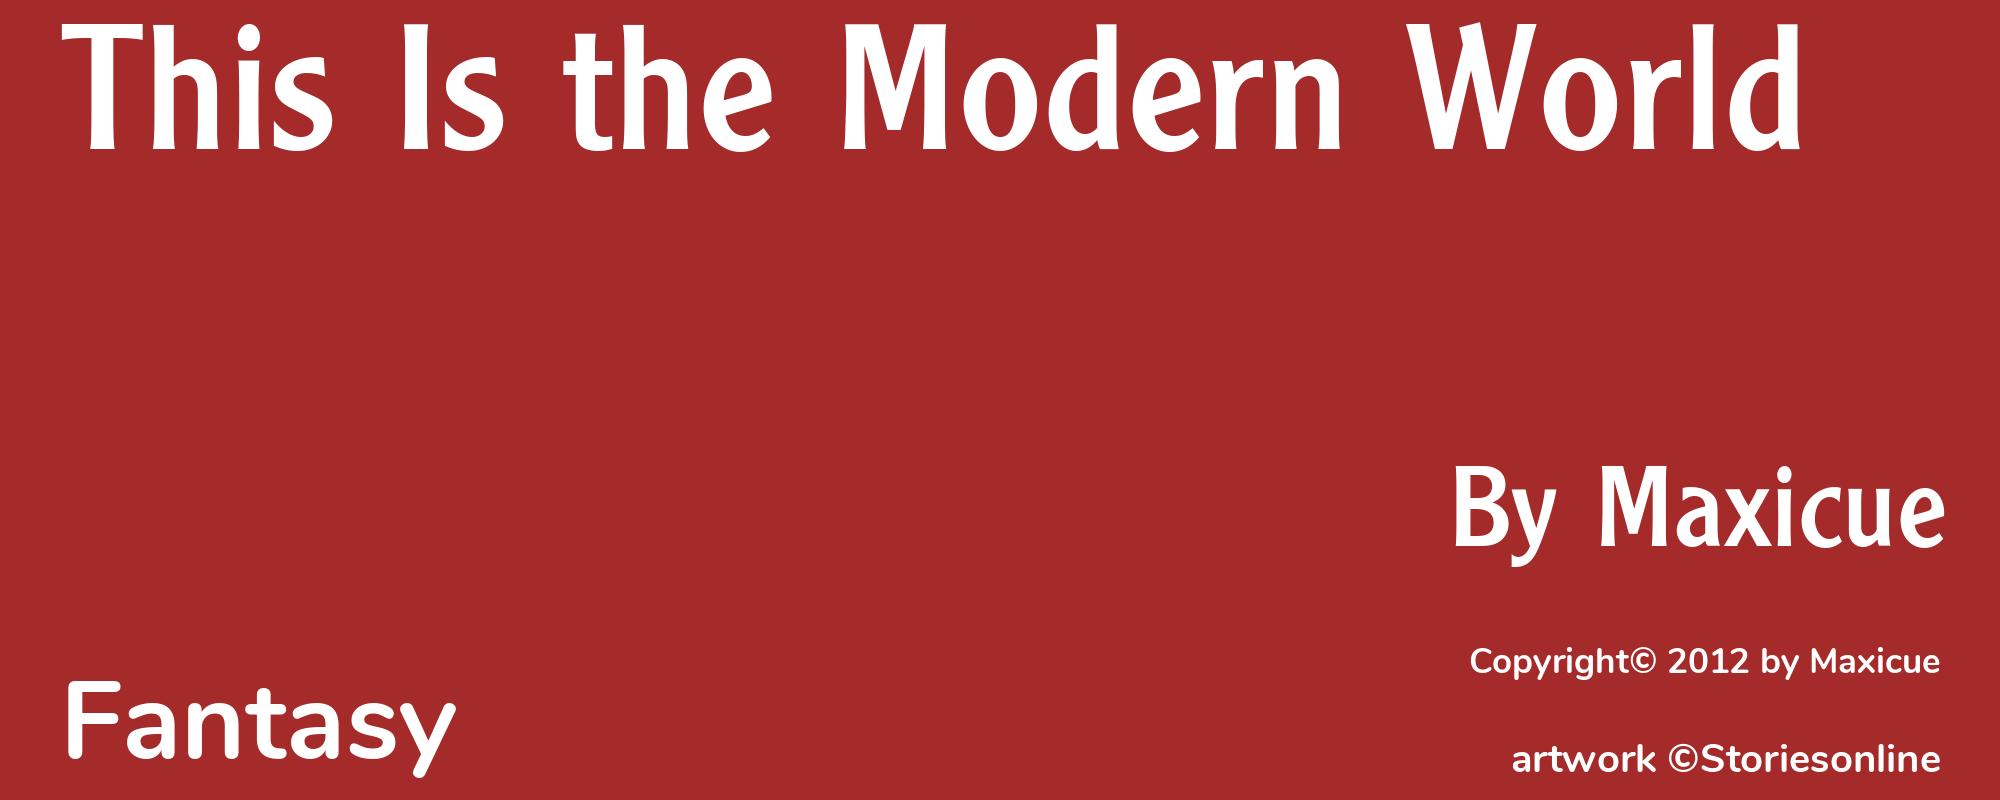 This Is the Modern World - Cover